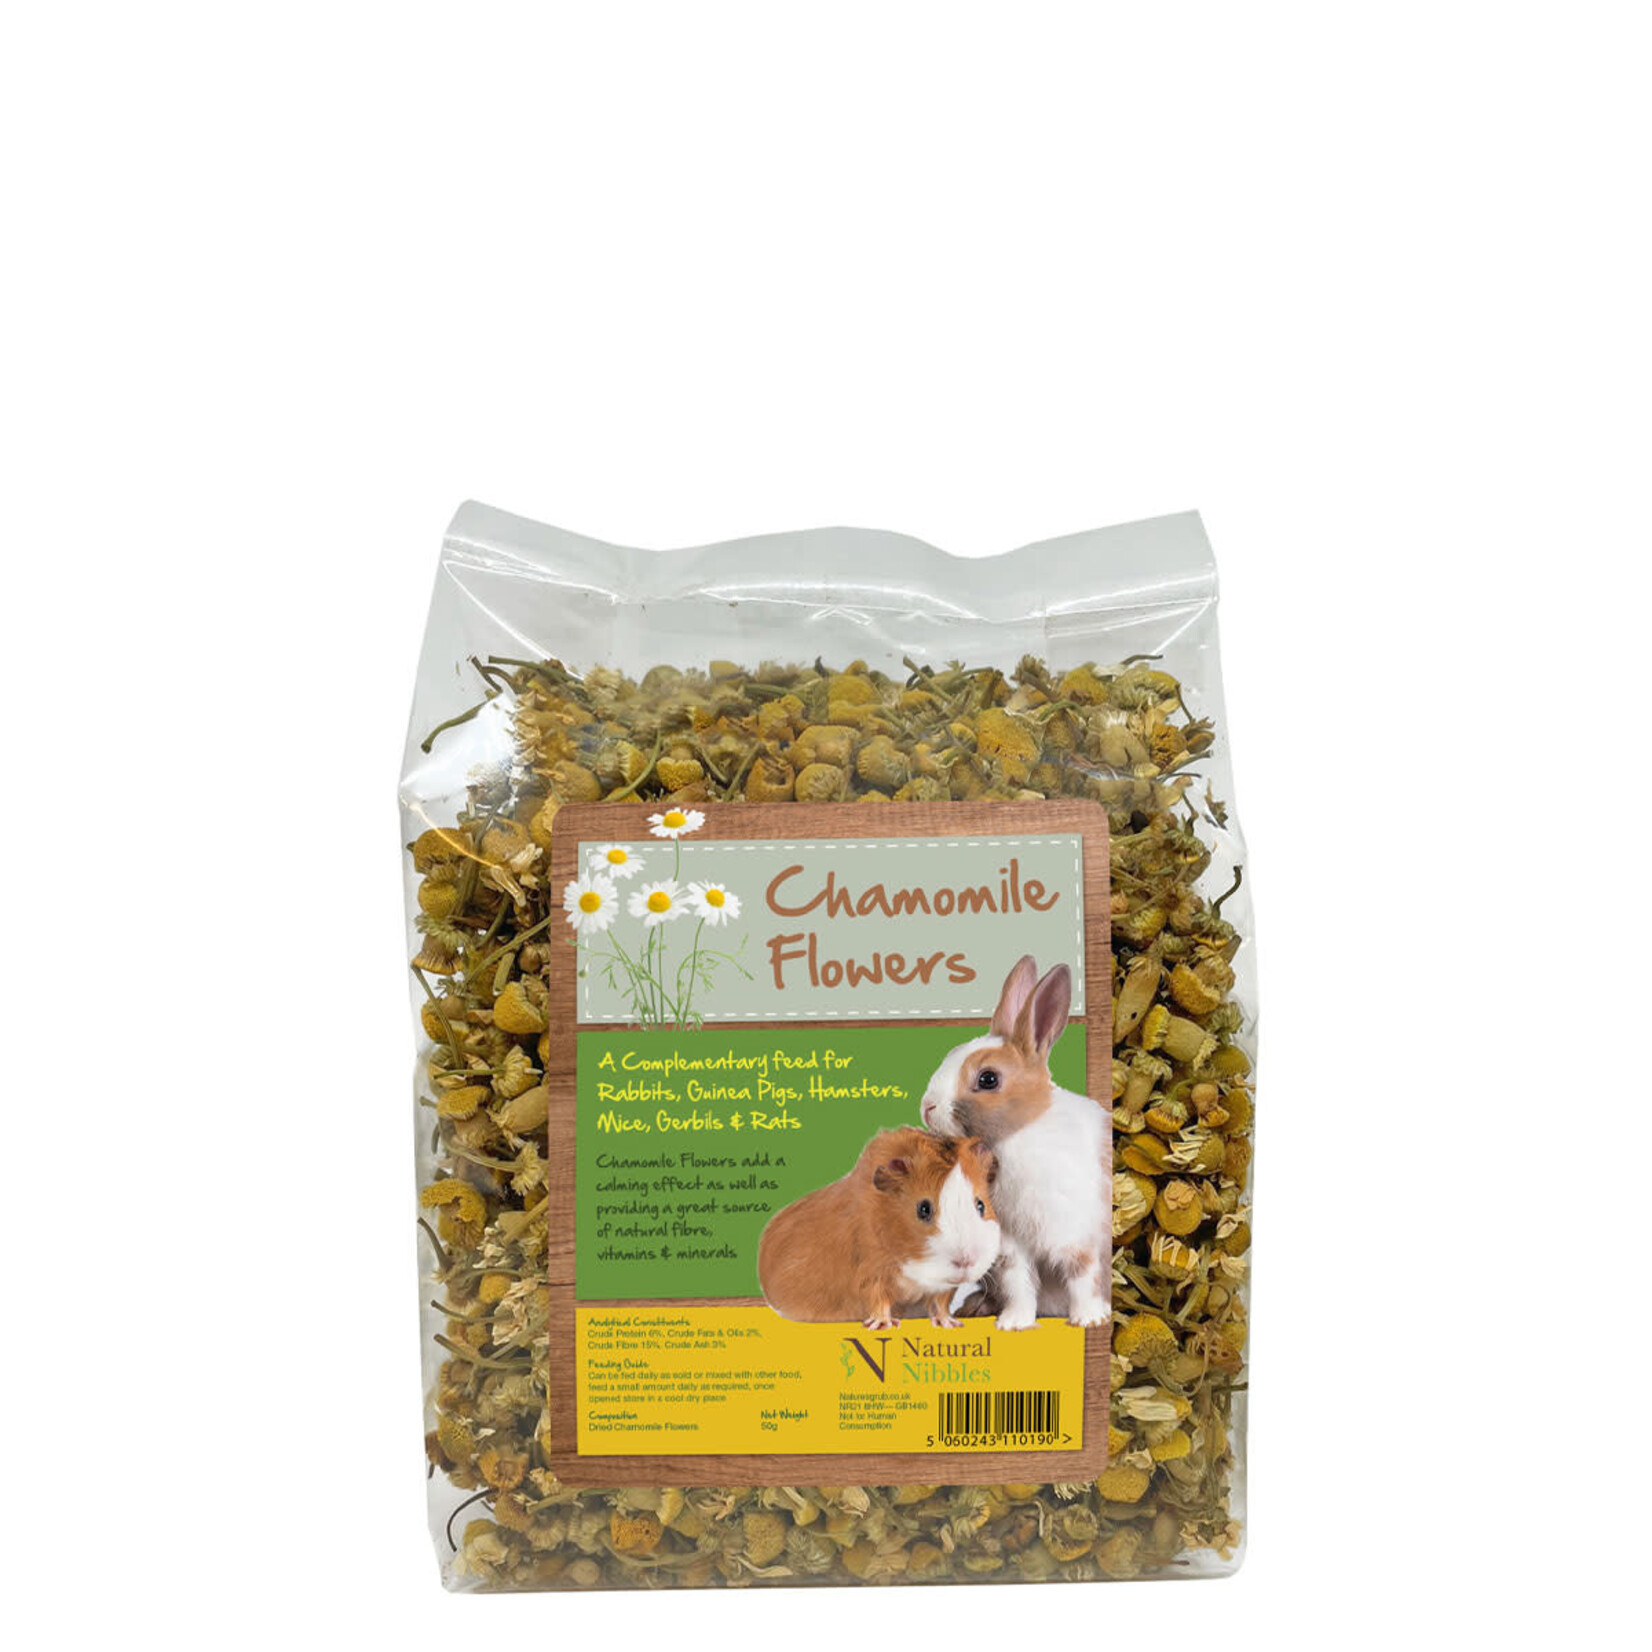 Petlife Natural Nibbles Chamomile Flowers Small Animal Treat, 50g